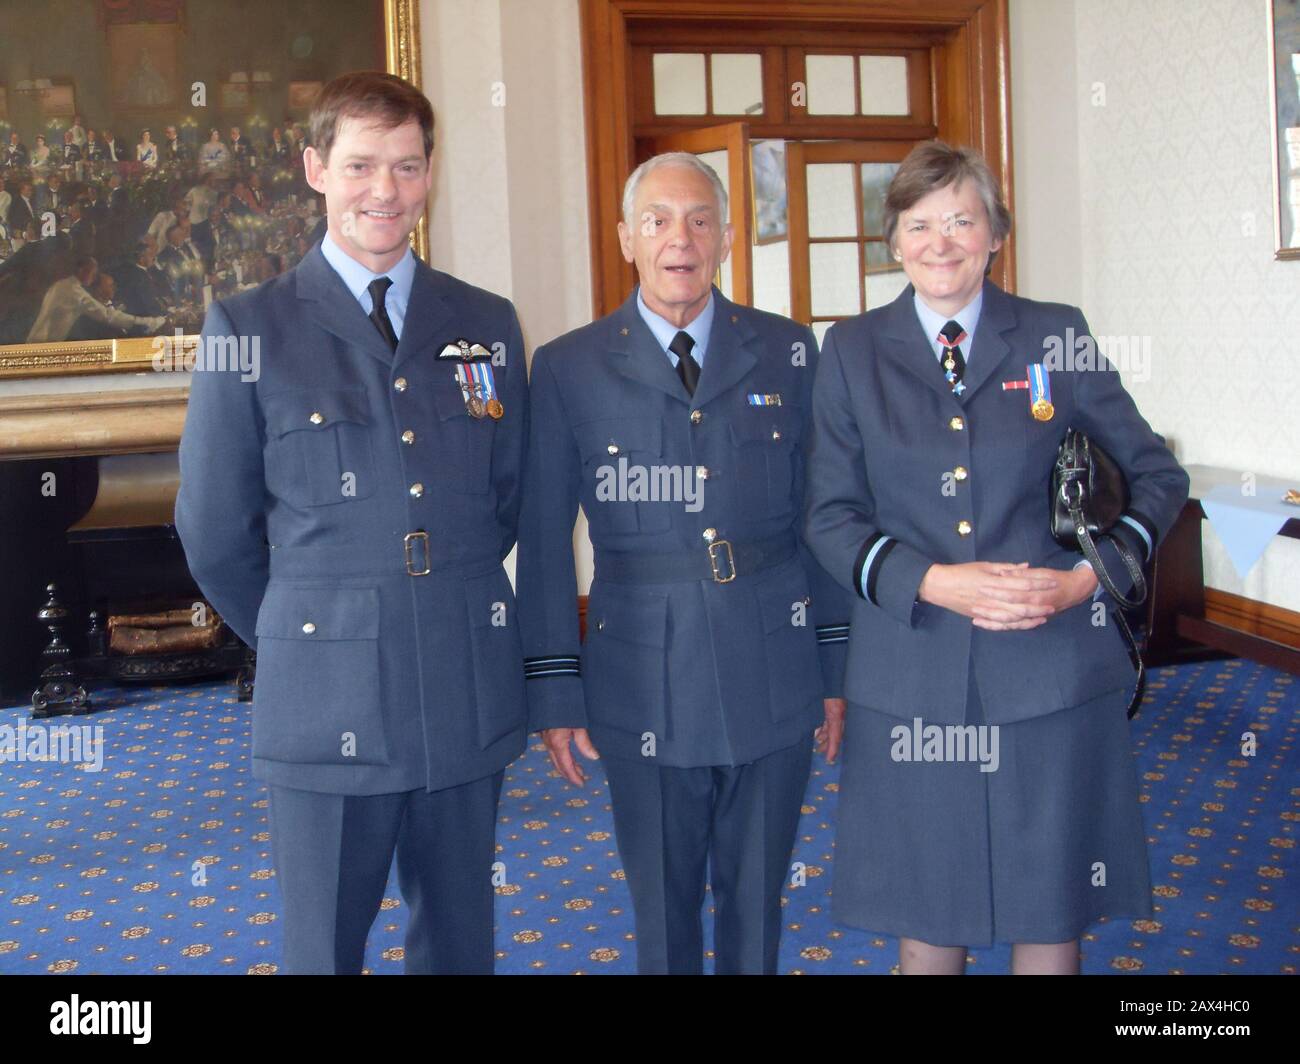 'English: Air Commodore Ian Stewart RAF, Flt Lt A.R.T. Bennett RAF VR(T) and Air Commodore Barbara Cooper RAF at RAFC Cranwell Other Versions Air Cmdr Barbara Cooper.jpg; 3 June 2010 (original upload date); Transferred from en.wikipedia to Commons by Sreejithk2000 using CommonsHelper.; Goober alive at English Wikipedia; ' Stock Photo